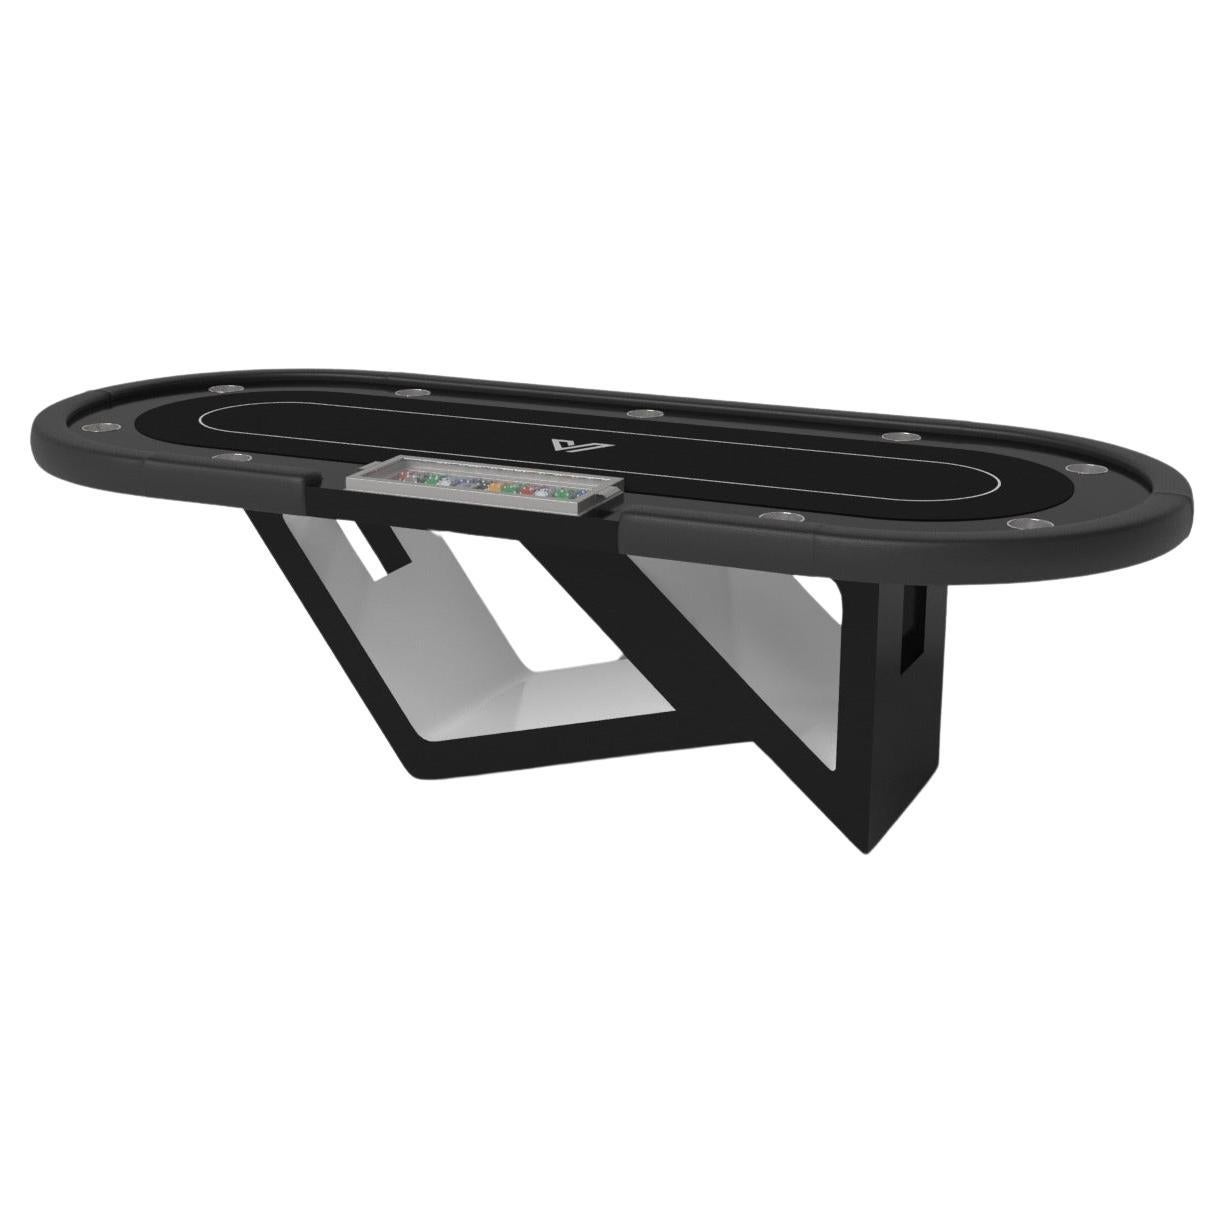 Elevate Customs Rumba Poker Tables / Solid Pantone Black Color  in 8'8" - USA For Sale